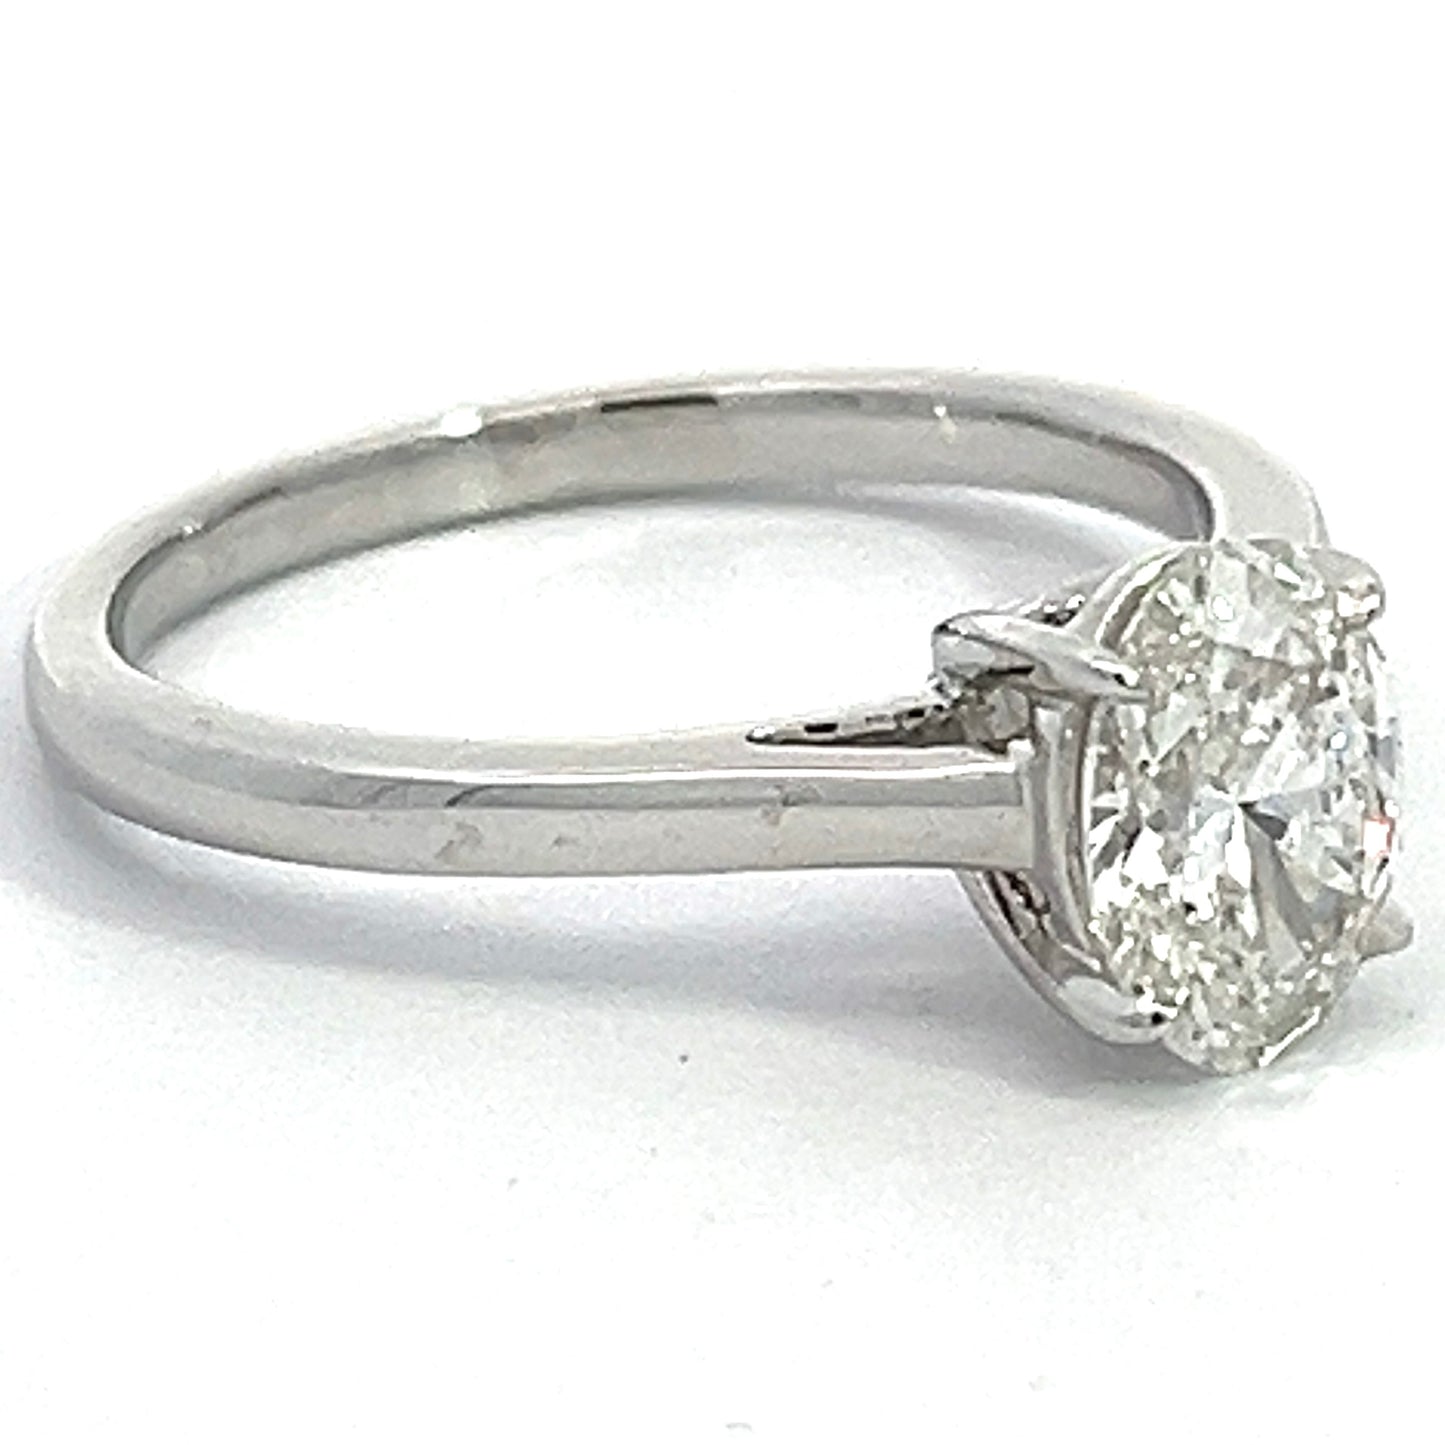 1.00 CT Oval Lab Grown Diamond Solitaire Ring in White Gold